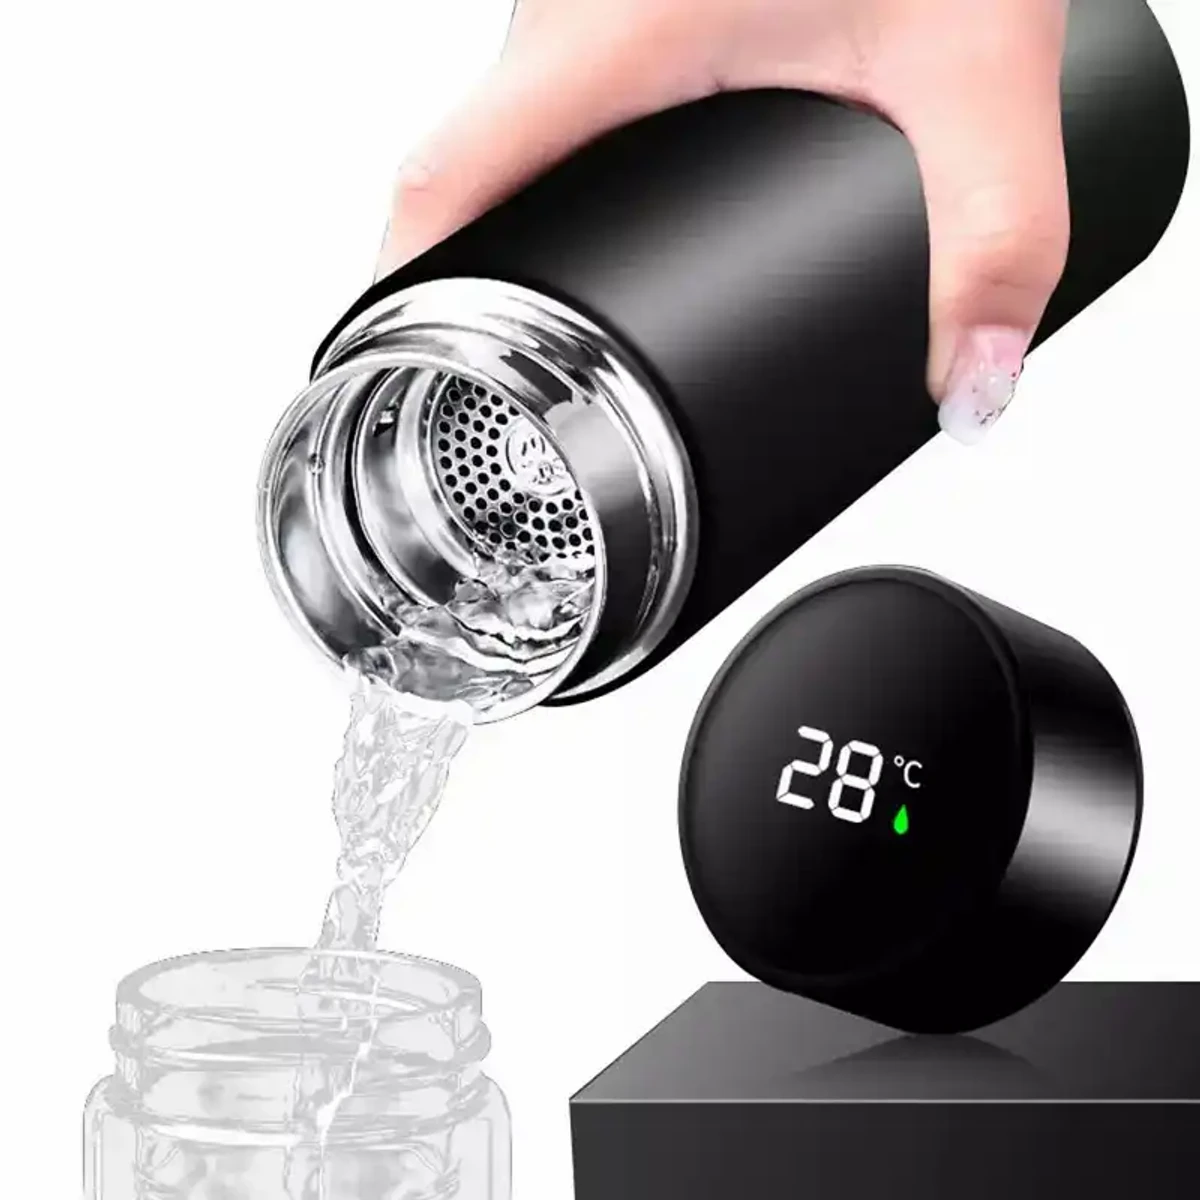 SMART CUP LED TEMPERATURE DISPLAY 31% Off